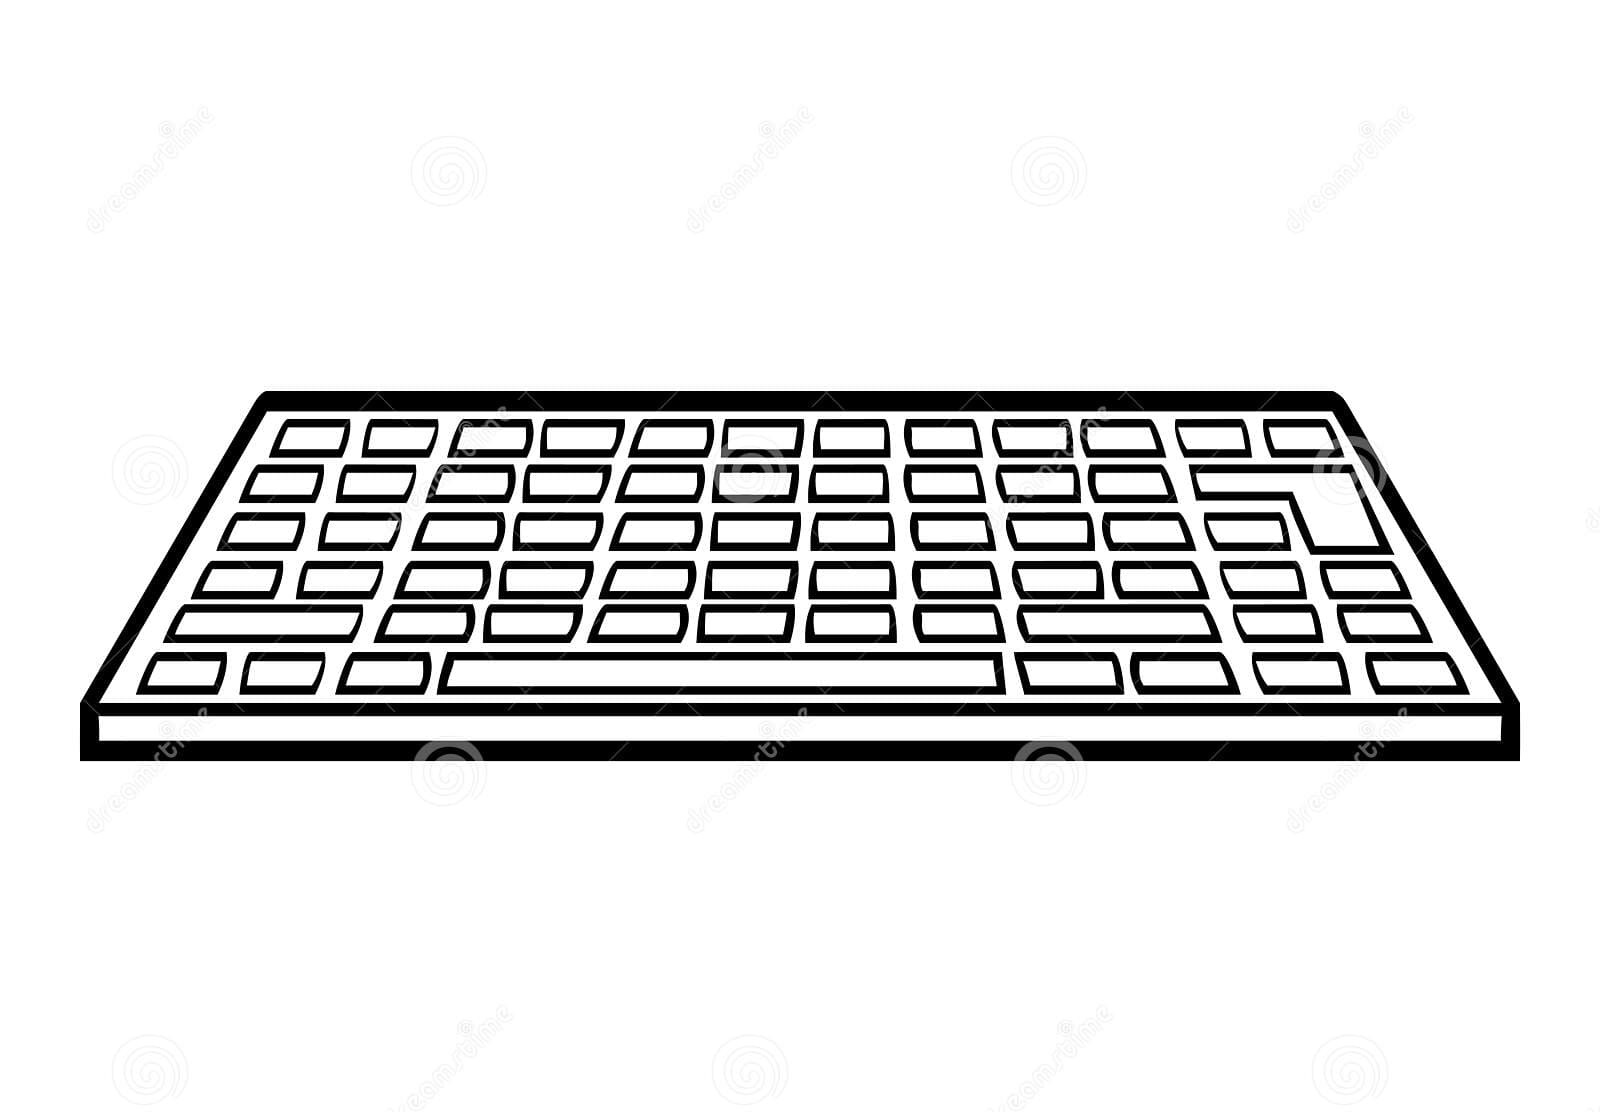 Coloring book, Computer keyboard Coloring Pages - Coloring Cool